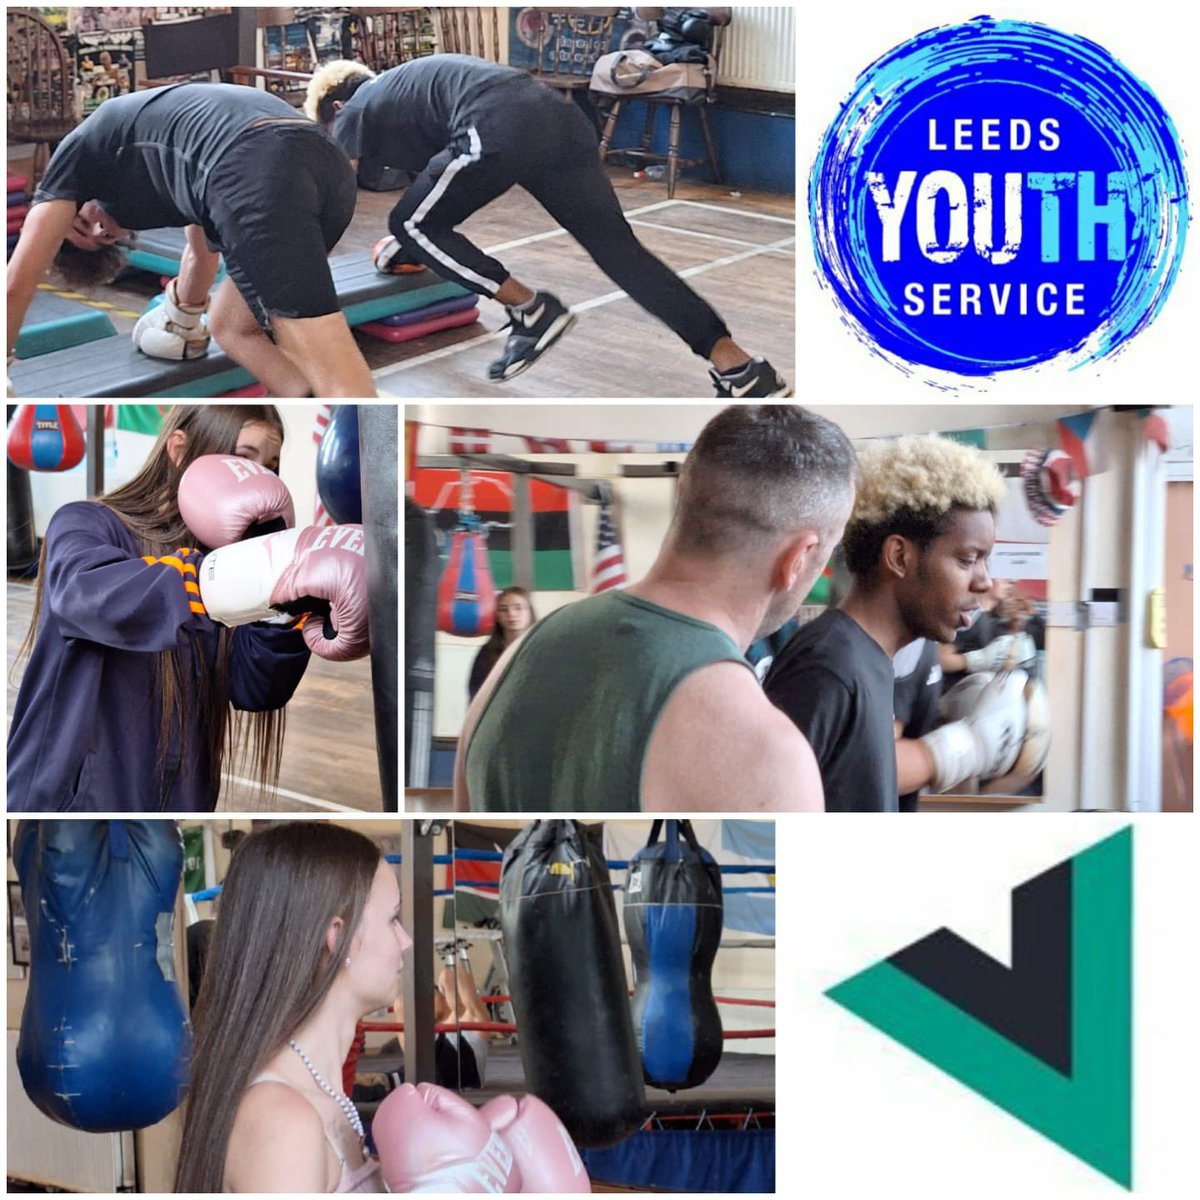 Another fantastic session this evening alongside @leemurtaghbui as part of our @wy_vrp #InnerEast project #Youngpeople focused on drill work & technique whilst engaging in discussions on #confidence & #selfcare for #MentalHealthAwarenessWeek #Youthwork